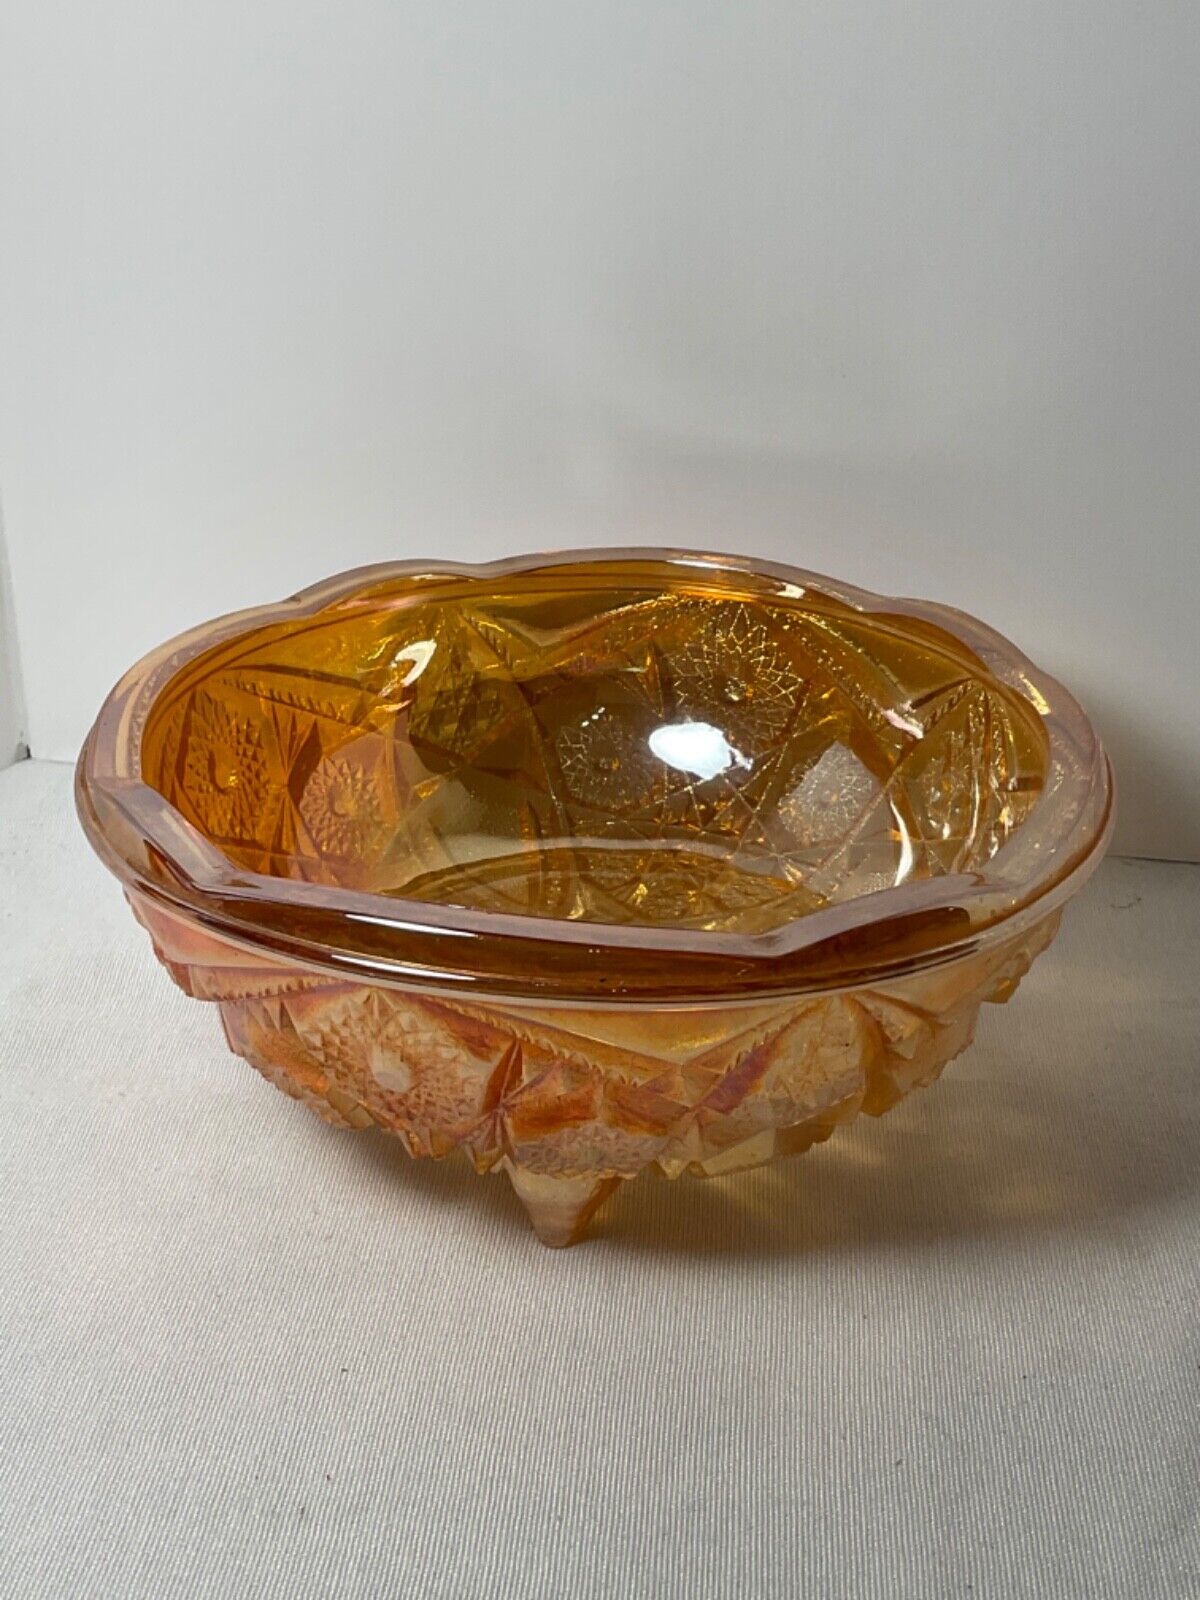 Carnival orange glass decorative various designs 7” footed bowl